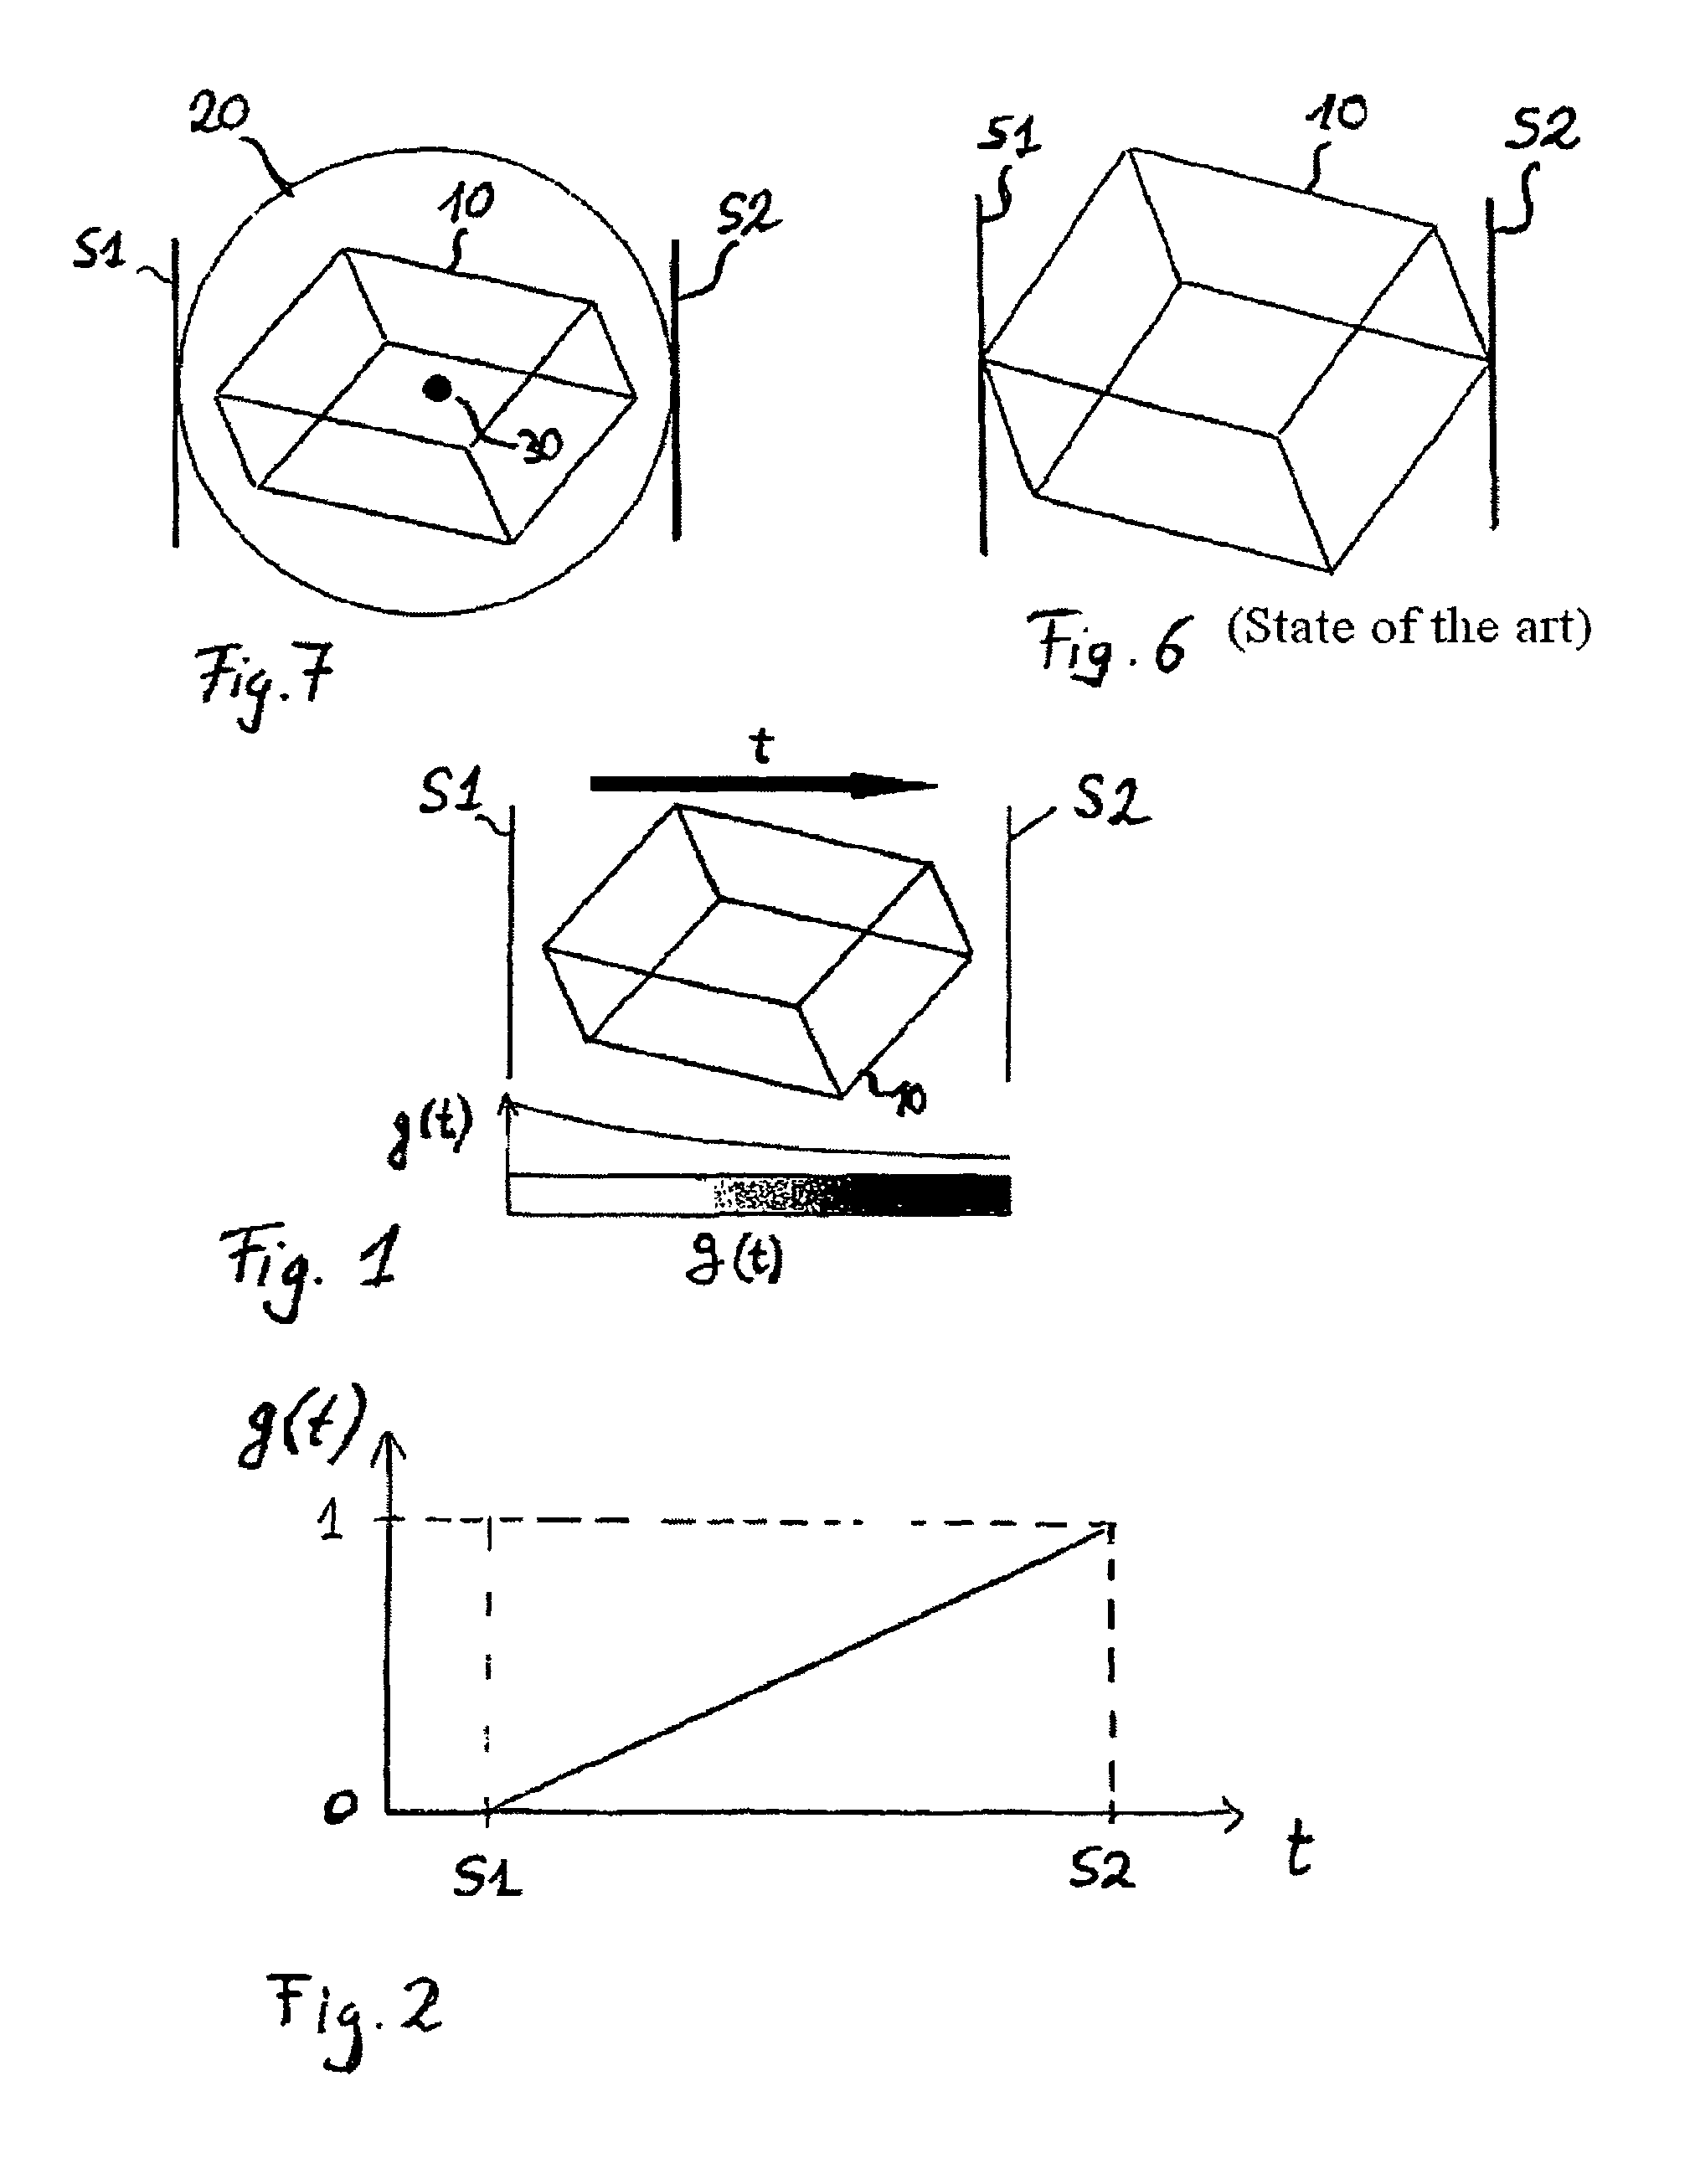 Method and apparatus for representing 3D image records in 2D images